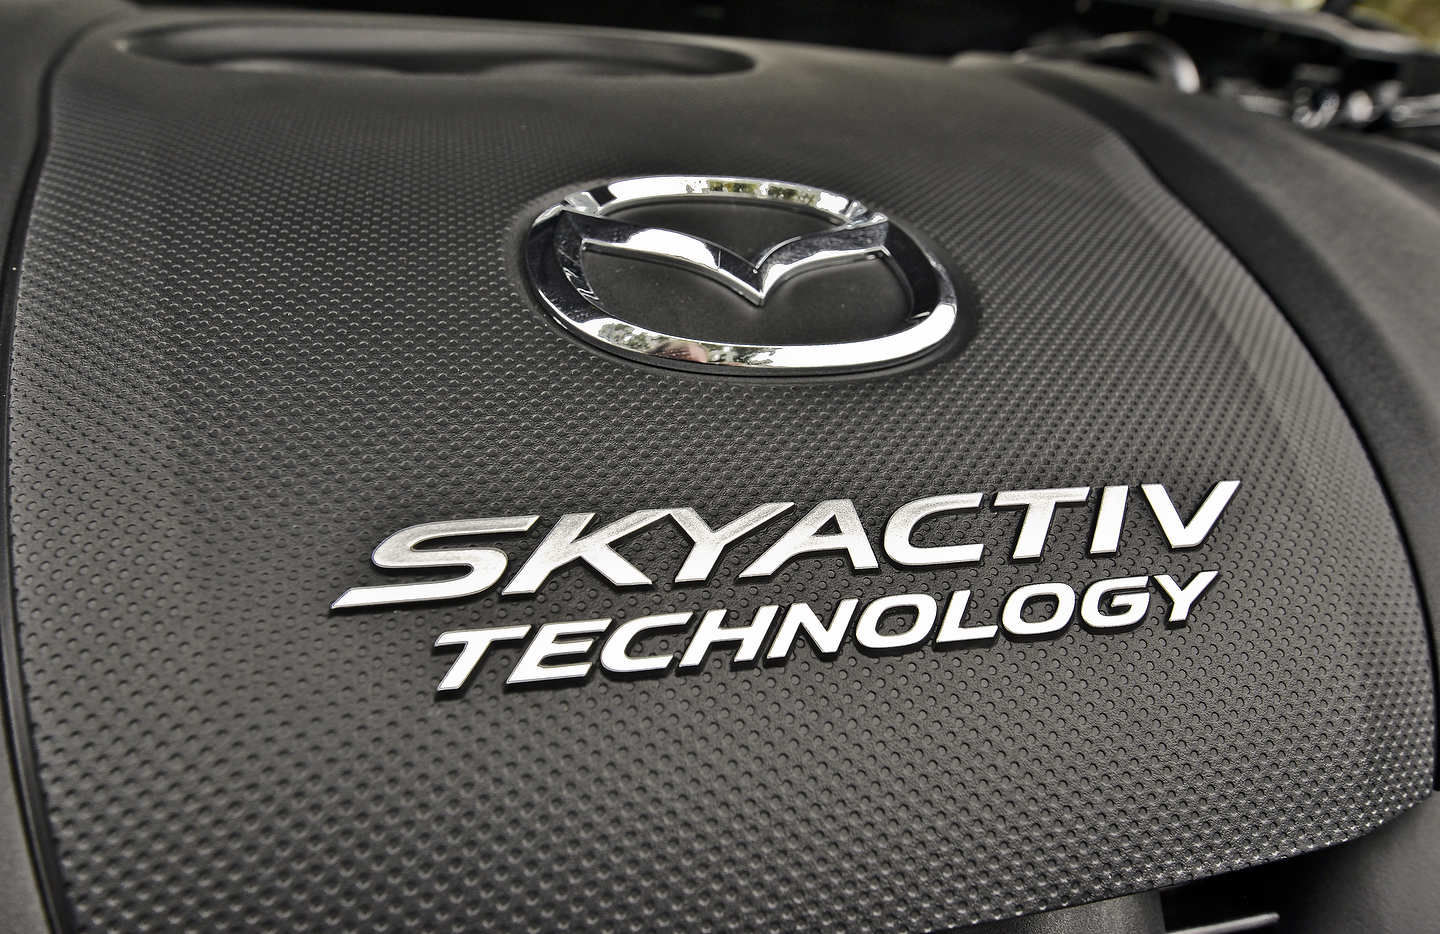 What is SKYACTIV technology?